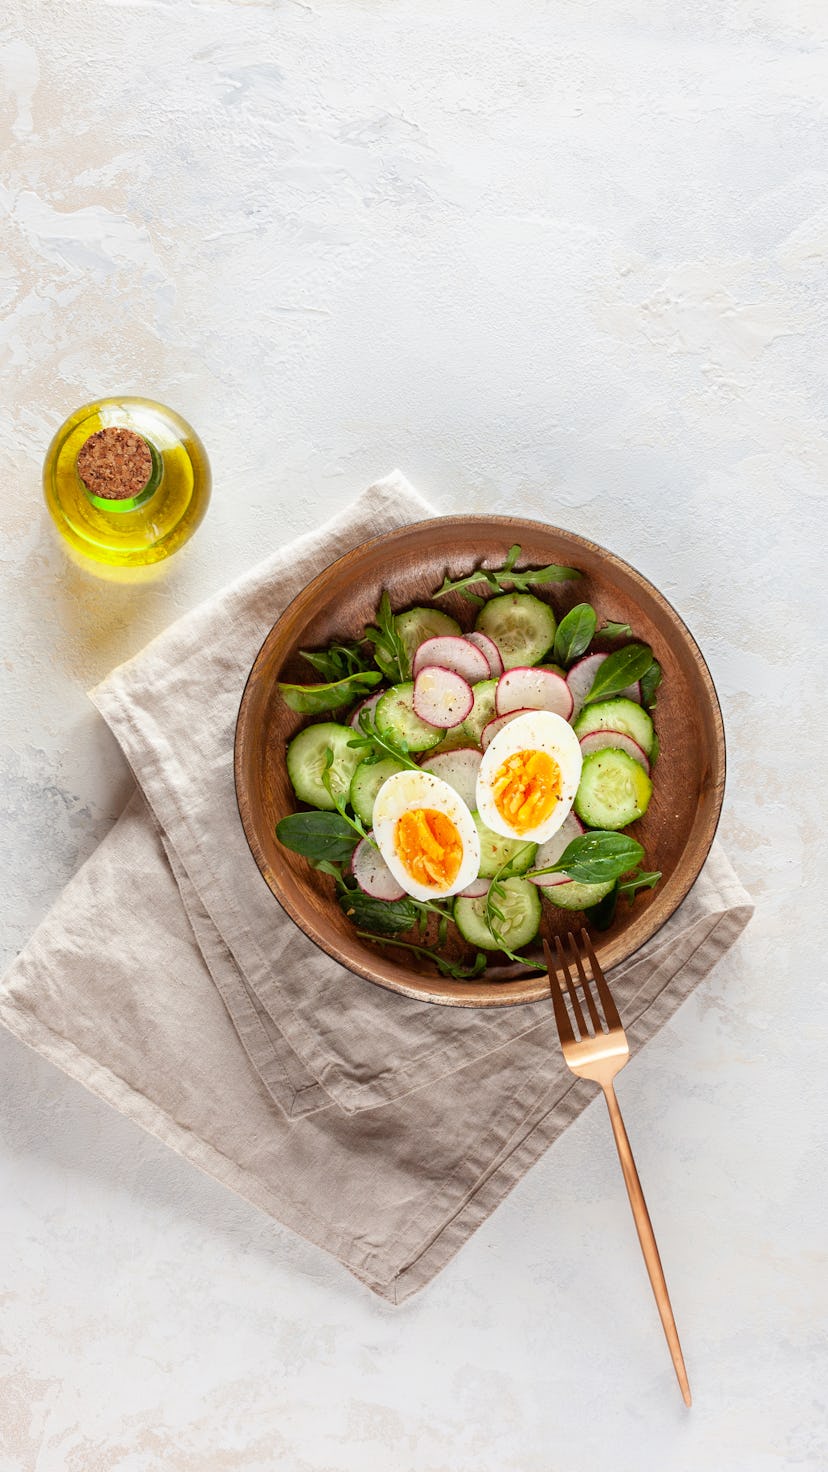 salad of radish, cucumber, arugula and boiled egg with olive oil in a wooden bowl